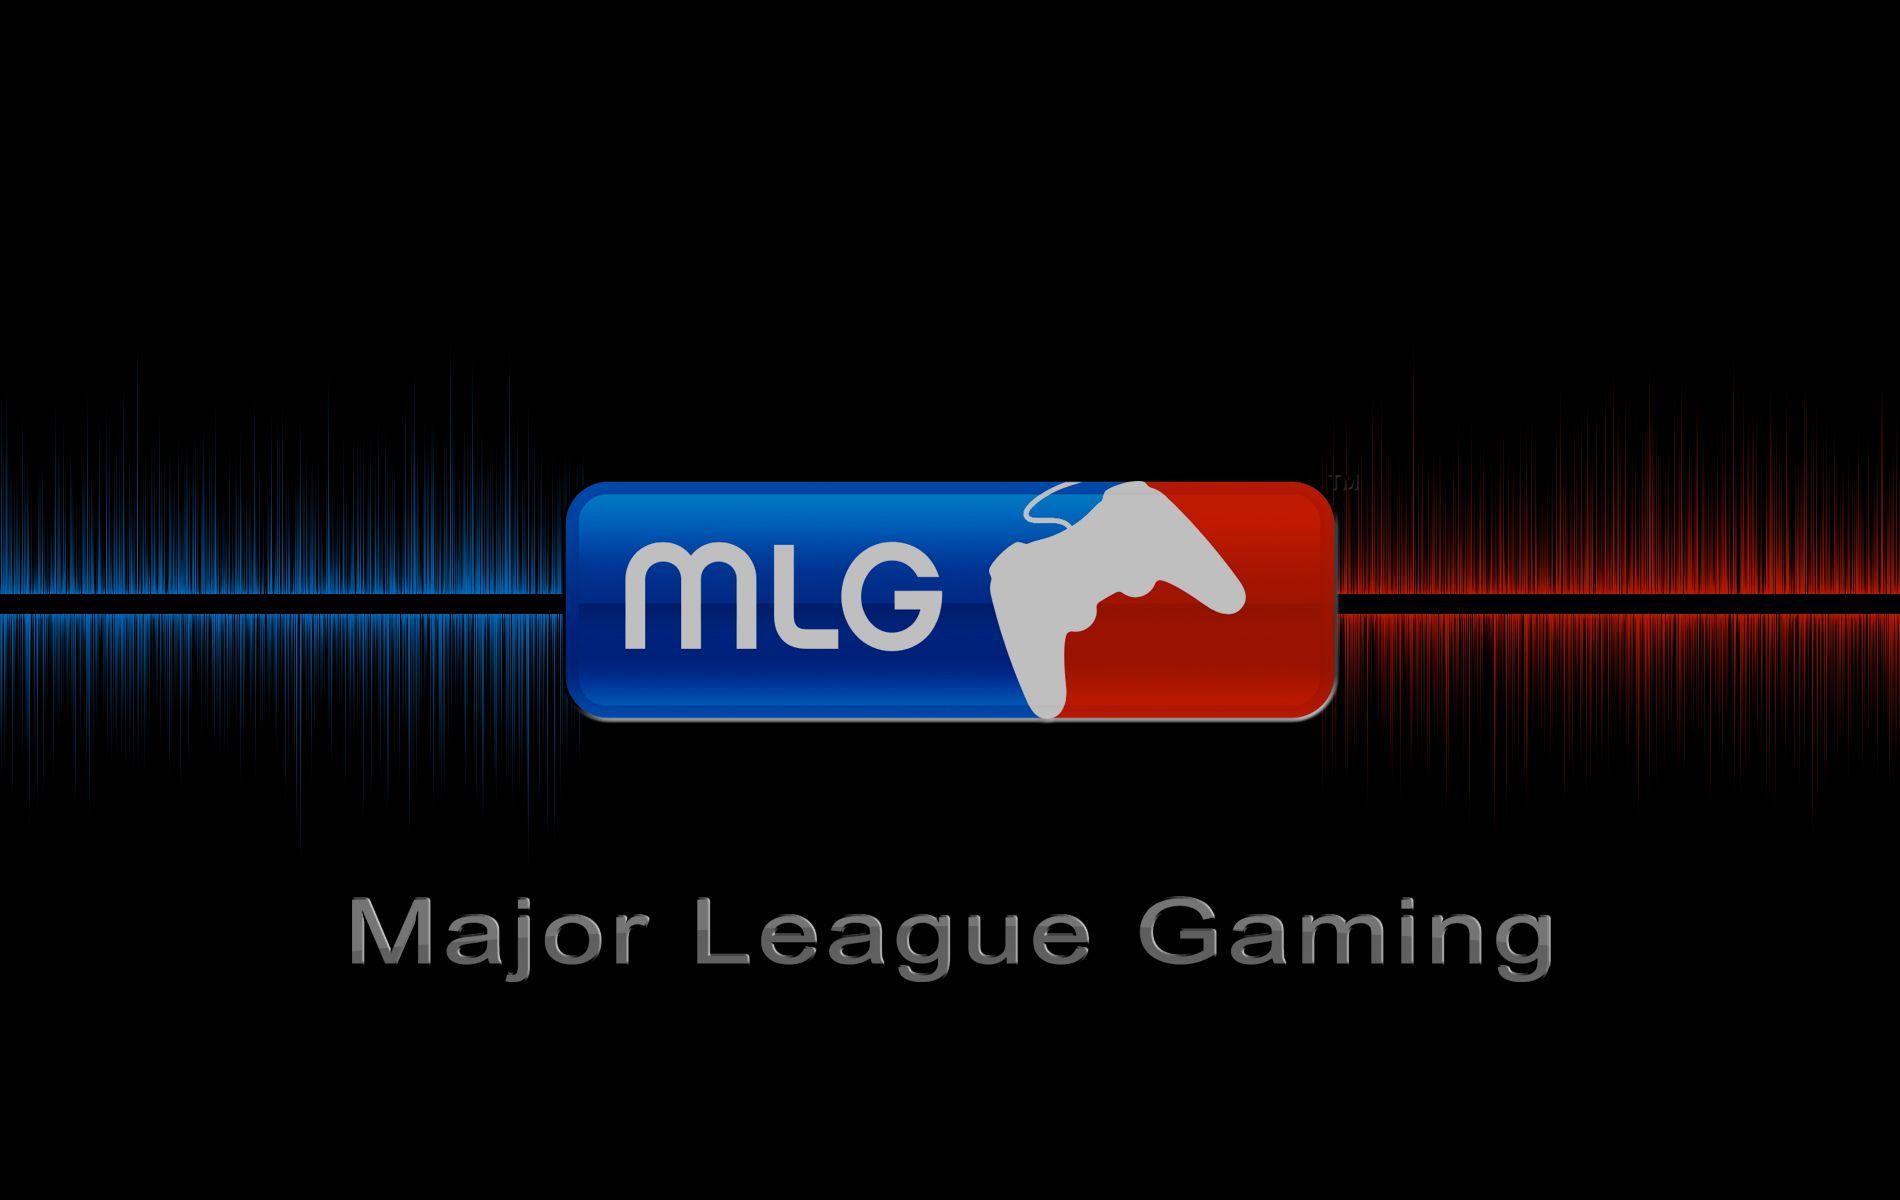 Major League Gaming App Launched on Xbox Xbox One Version